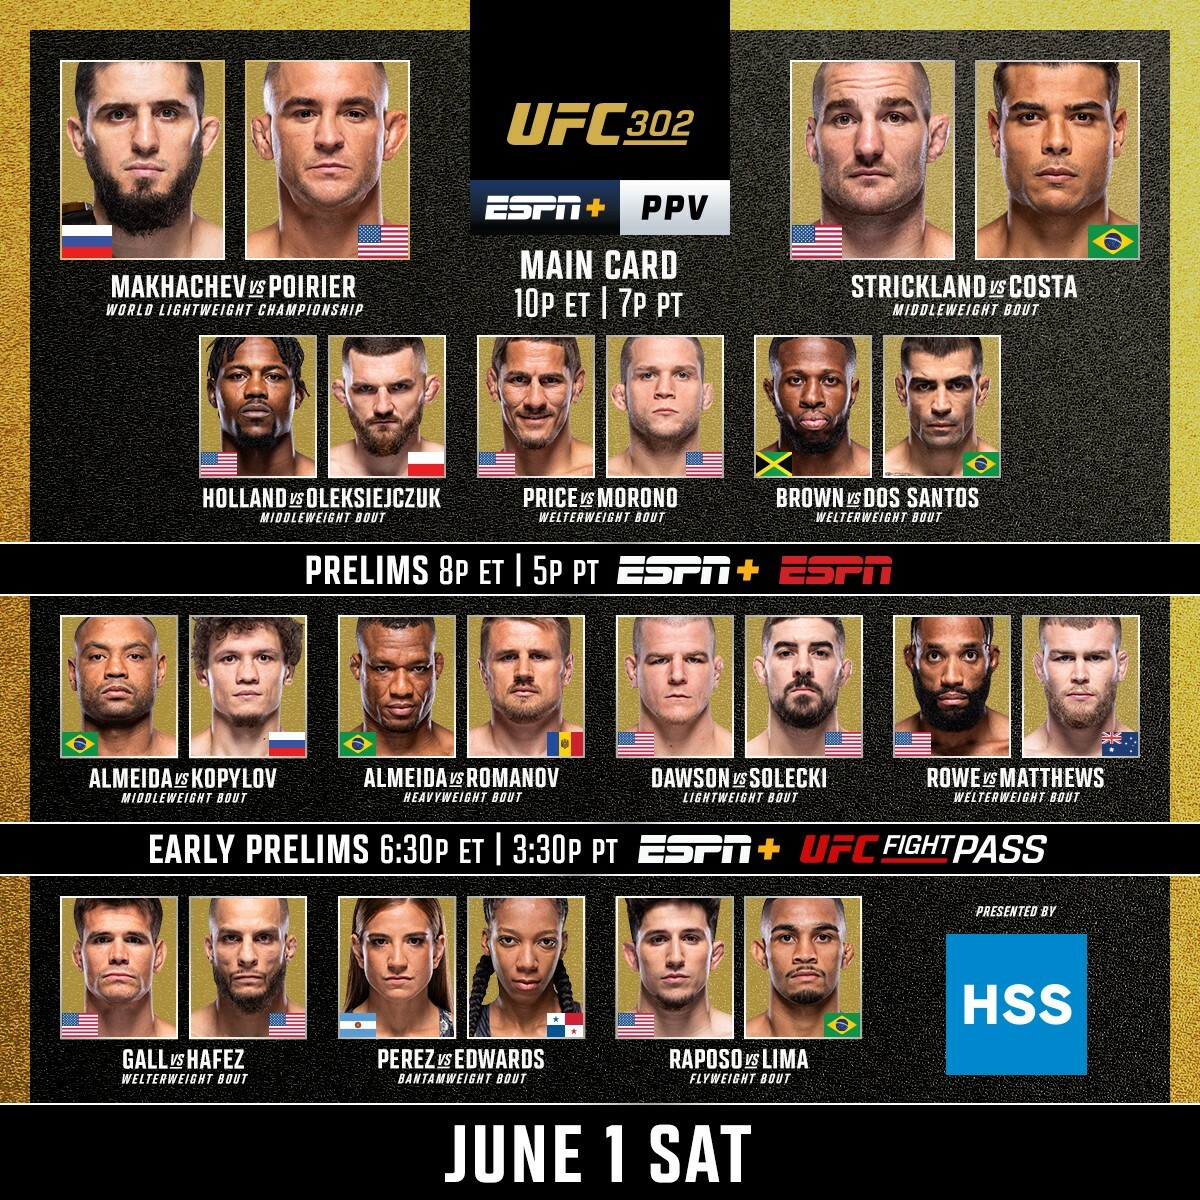 Ufc 302 results